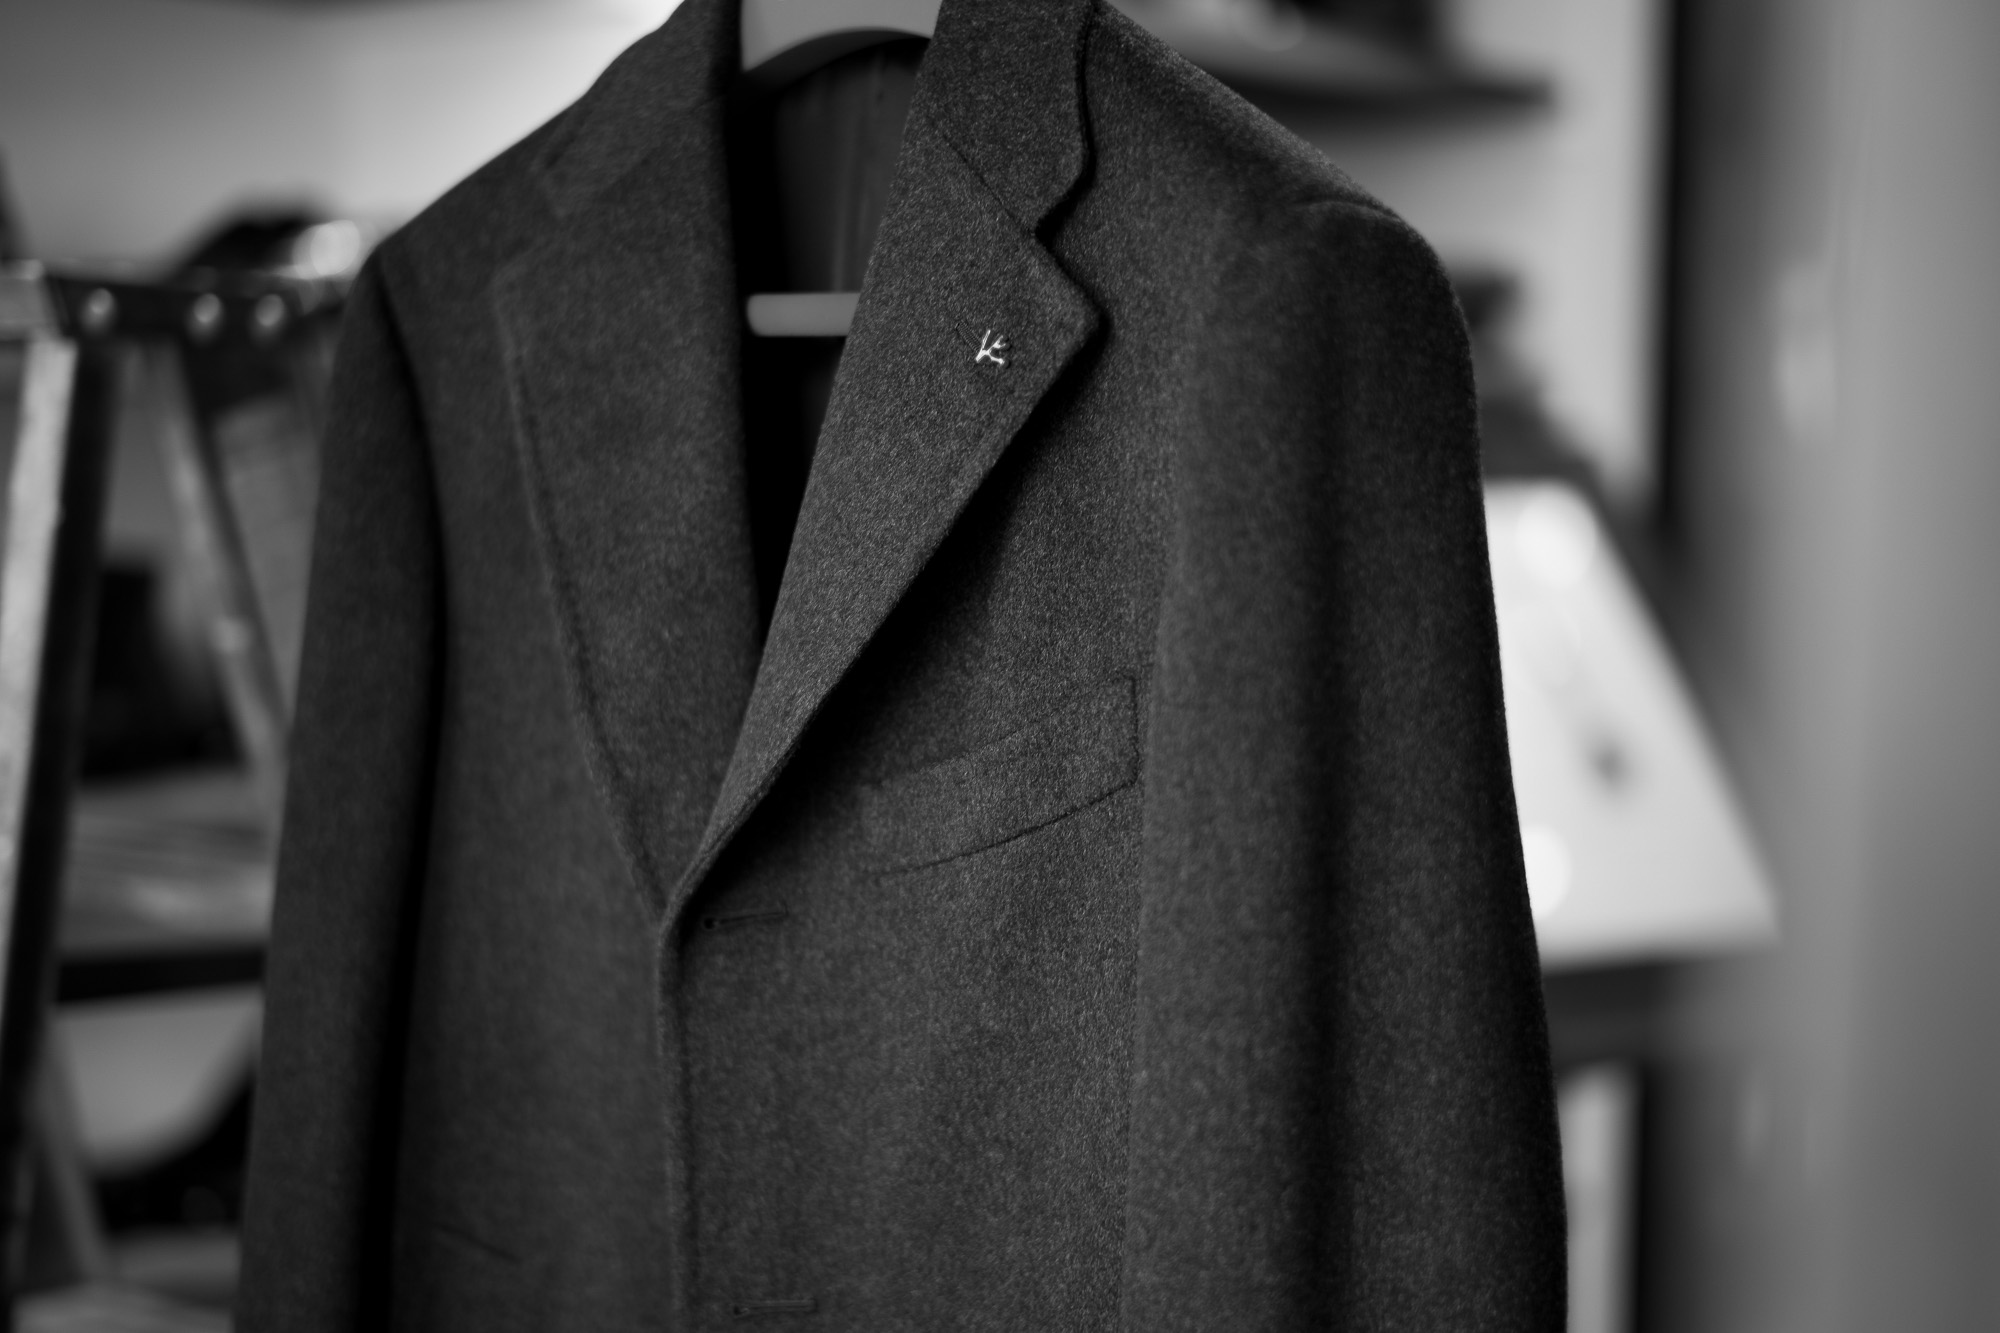 ISAIA "MADE TO MEASURE" ROSS CP TASCH TRENCH BEAVER CHARCOAL GRAY 2021AW イザイア オーダー ロス トレンチコート ビーバー チャコールグレー 2021秋冬 愛知 名古屋 Alto e Diritto altoediritto アルトエデリット